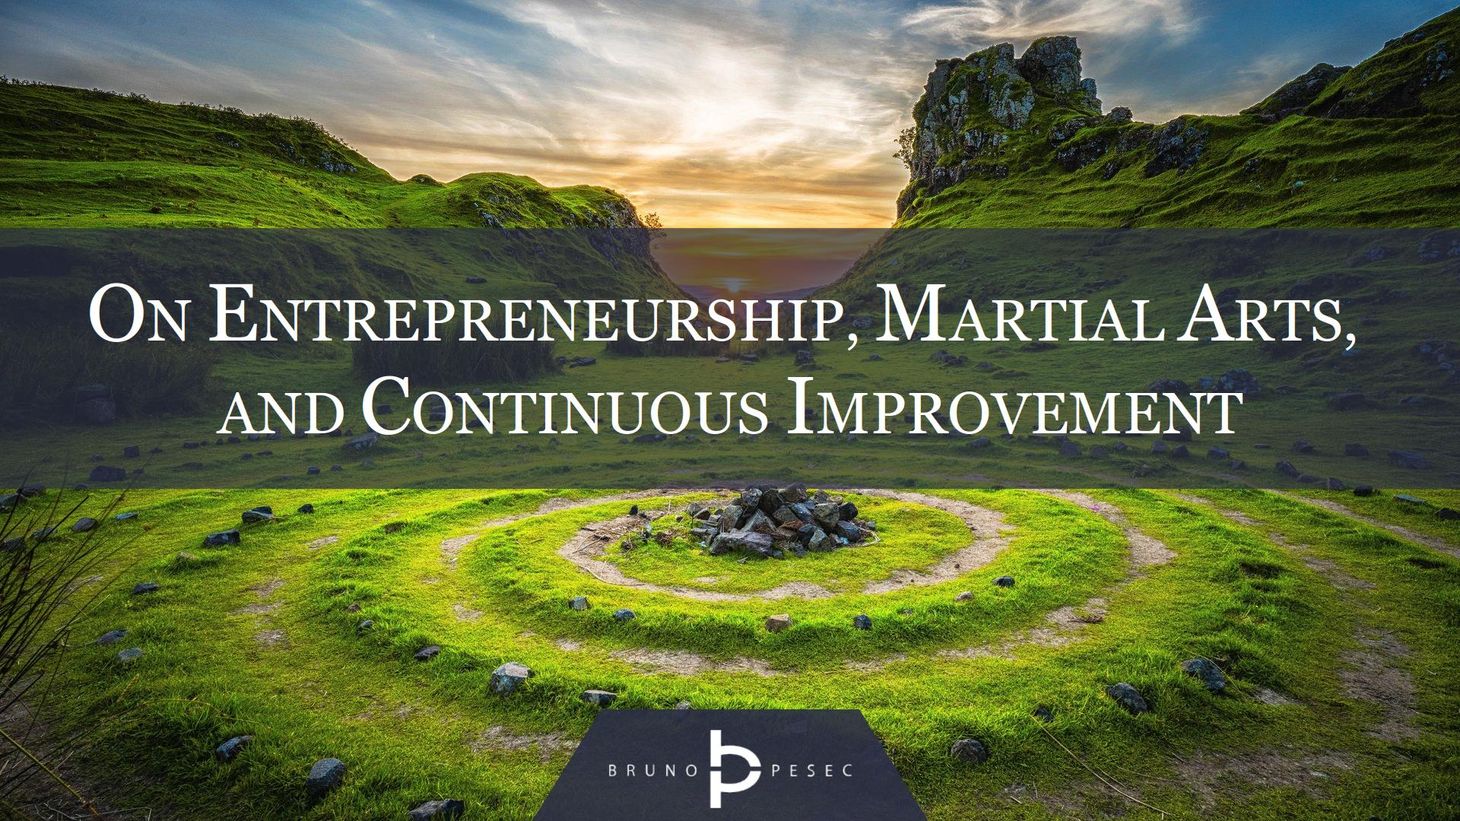 On entrepreneurship, martial arts, and continuous improvement